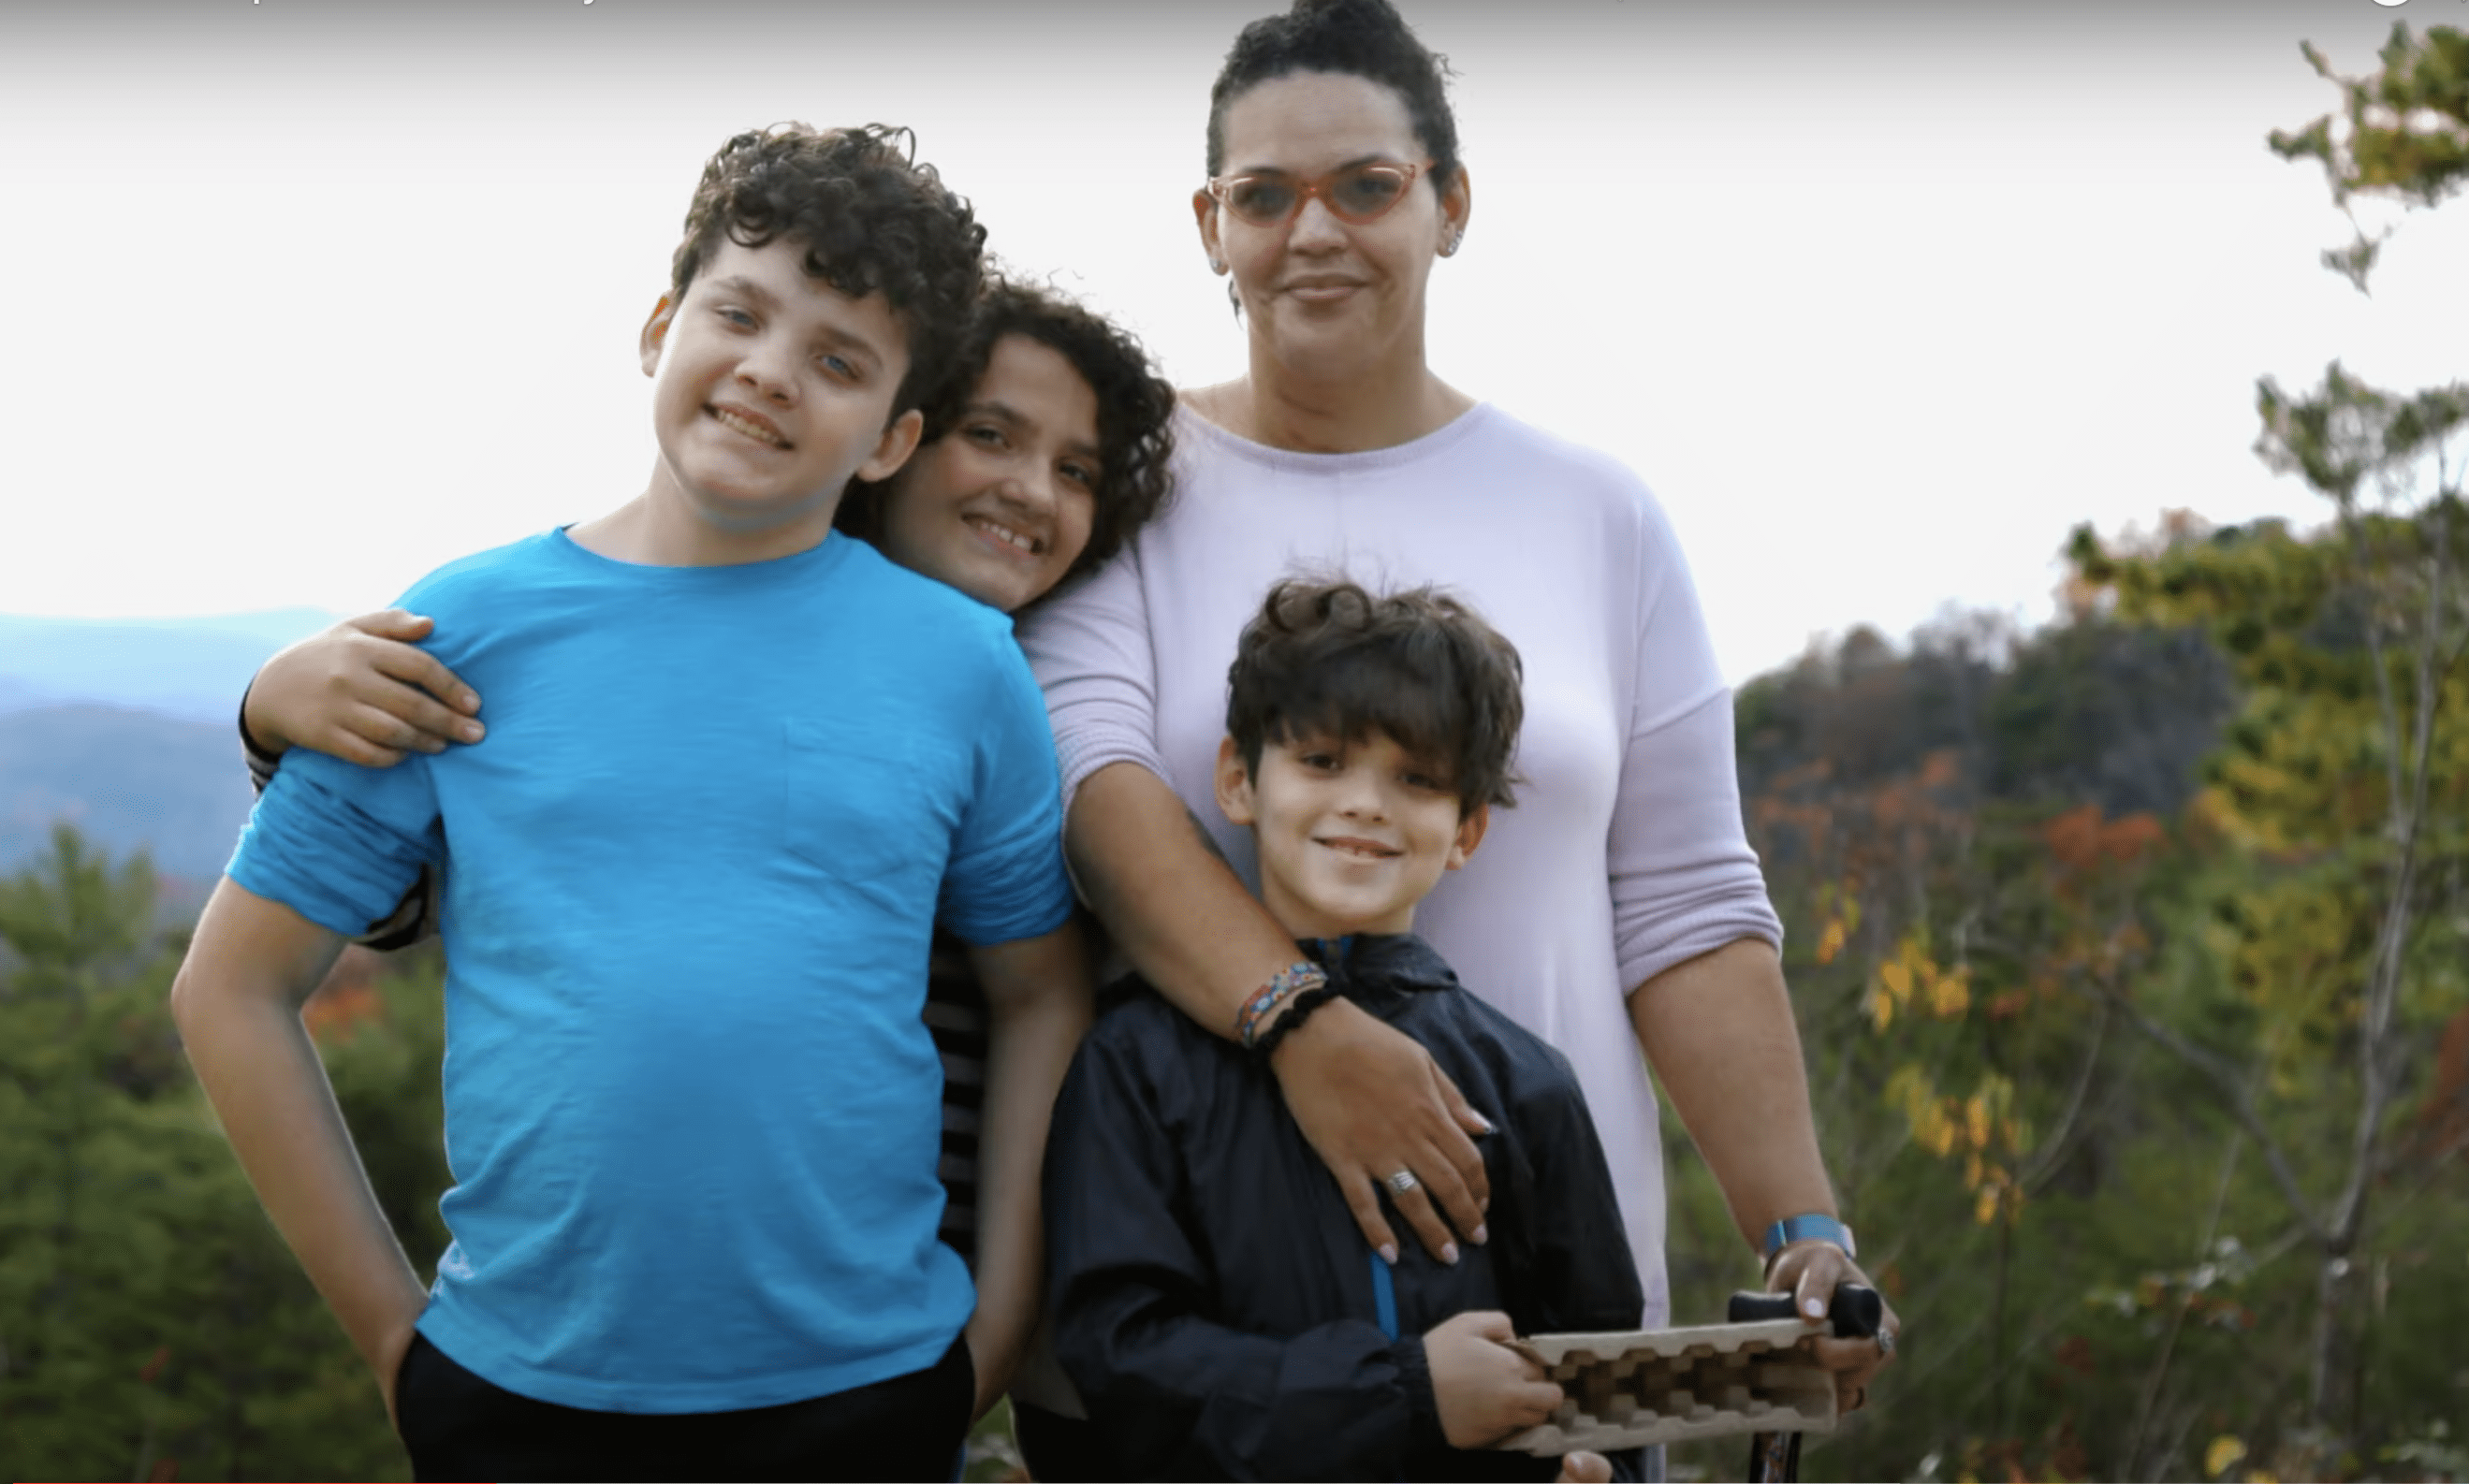 Alexandria Bolz and her kids. | Source: YouTube/WBIR Channel 10